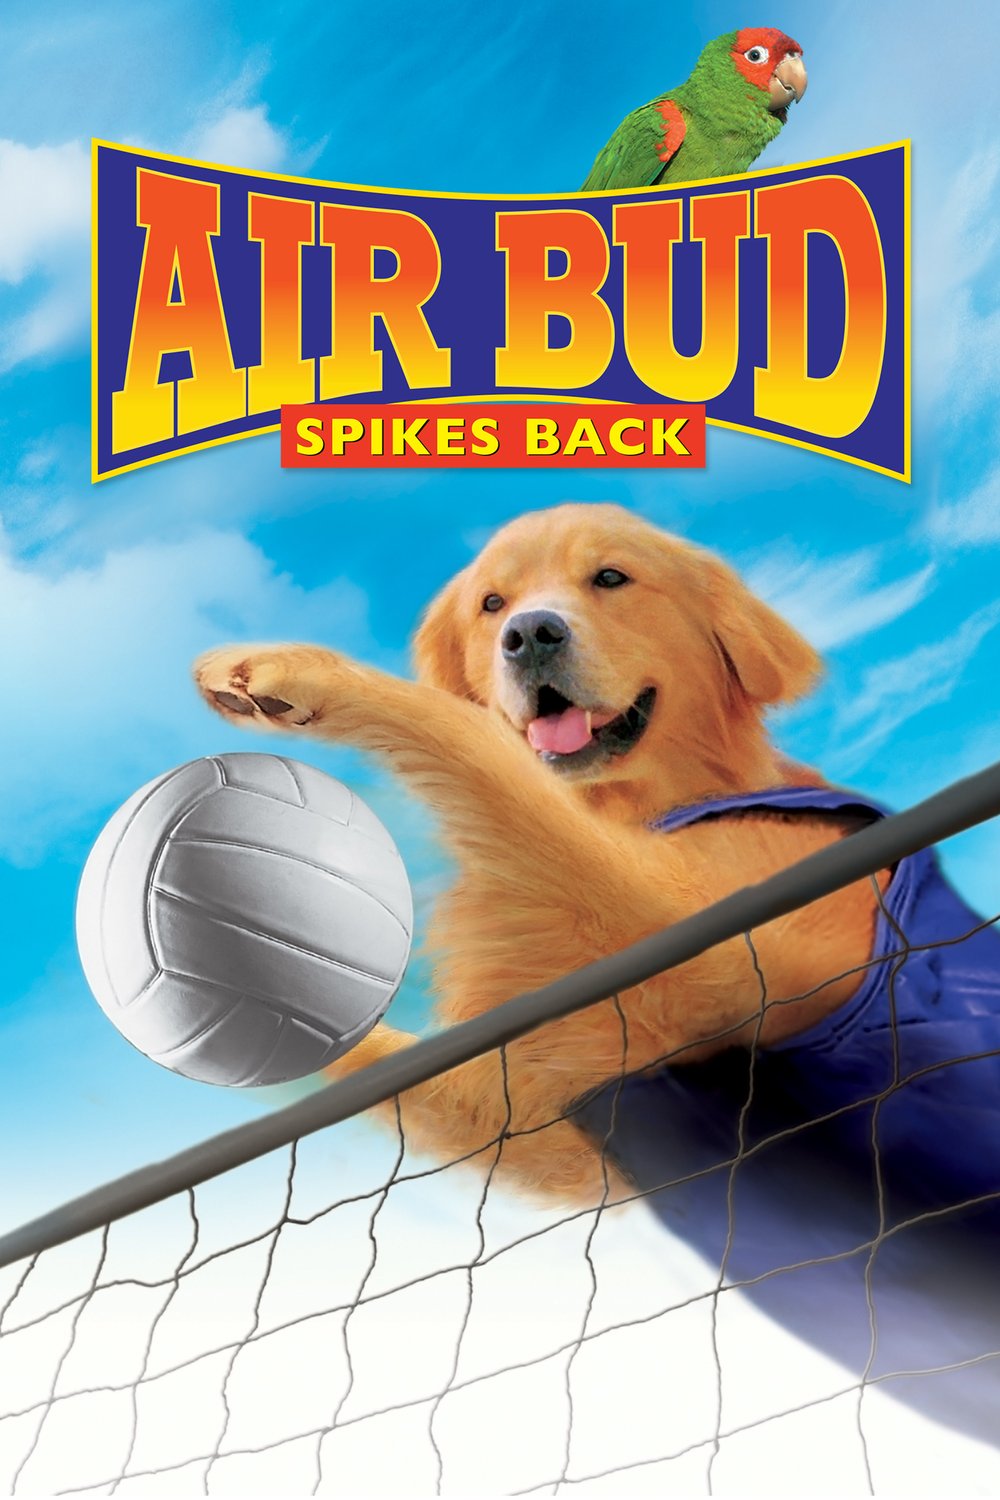 Poster of the movie Air Bud: Spikes Back